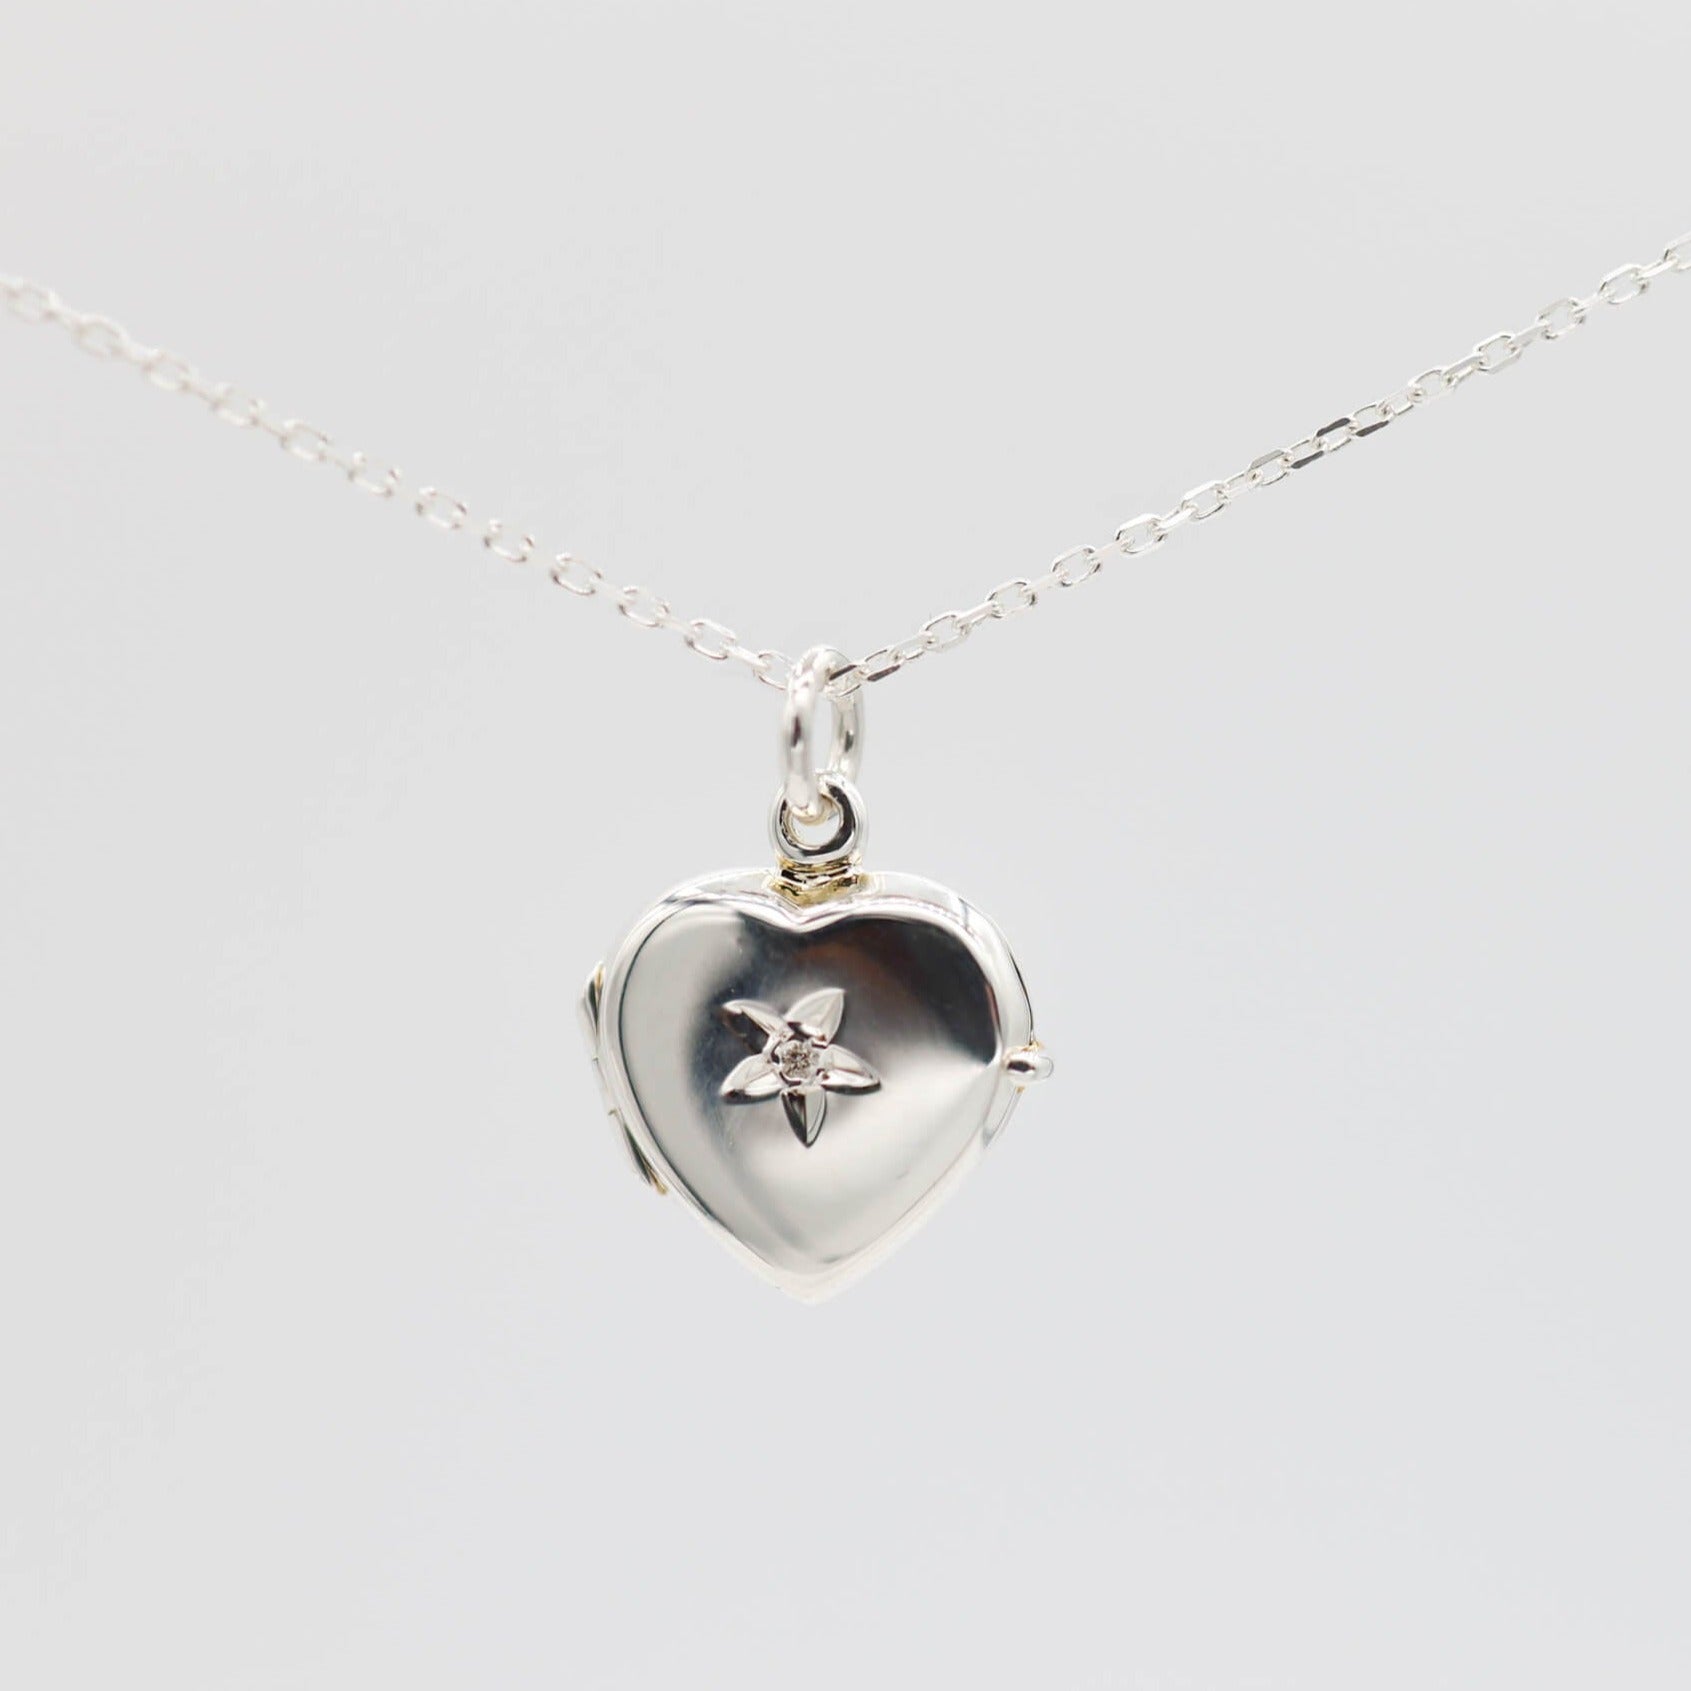 Heat shaped photo locket made from sterling silver on a white background